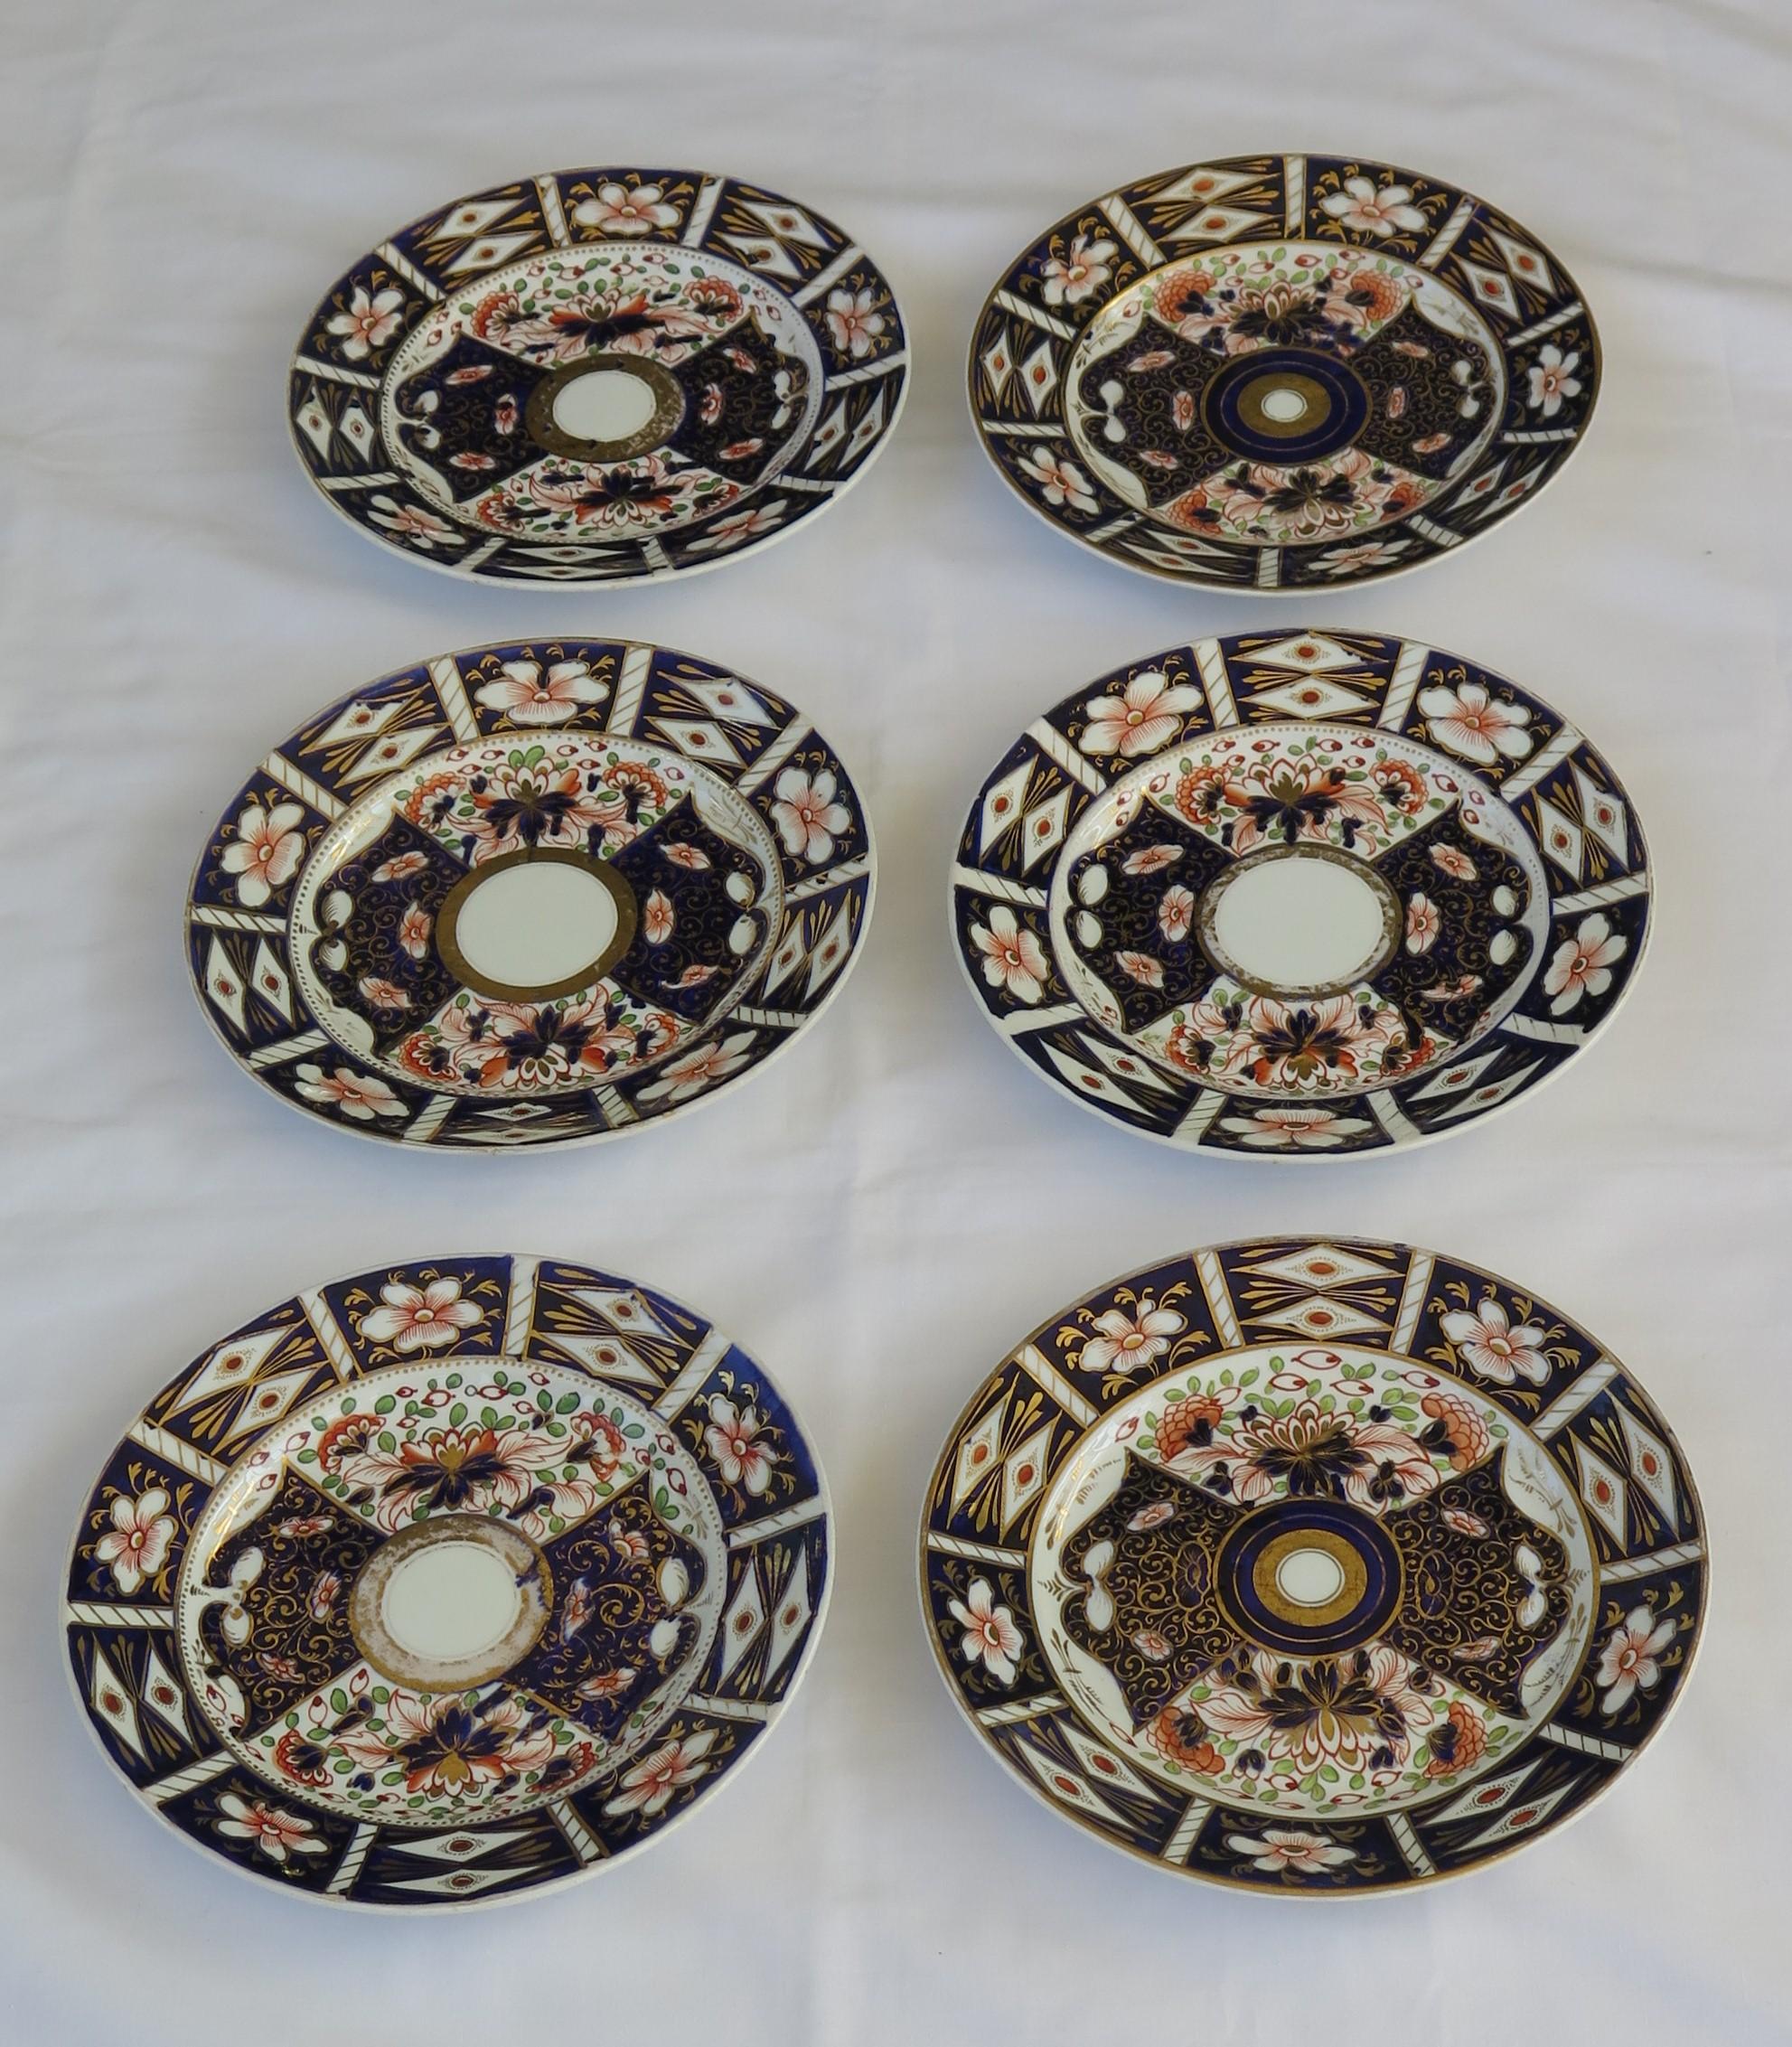 Chinoiserie SIX Davenport Porcelain Plates Hand Painted and Gilded Pattern, Circa 1870 For Sale